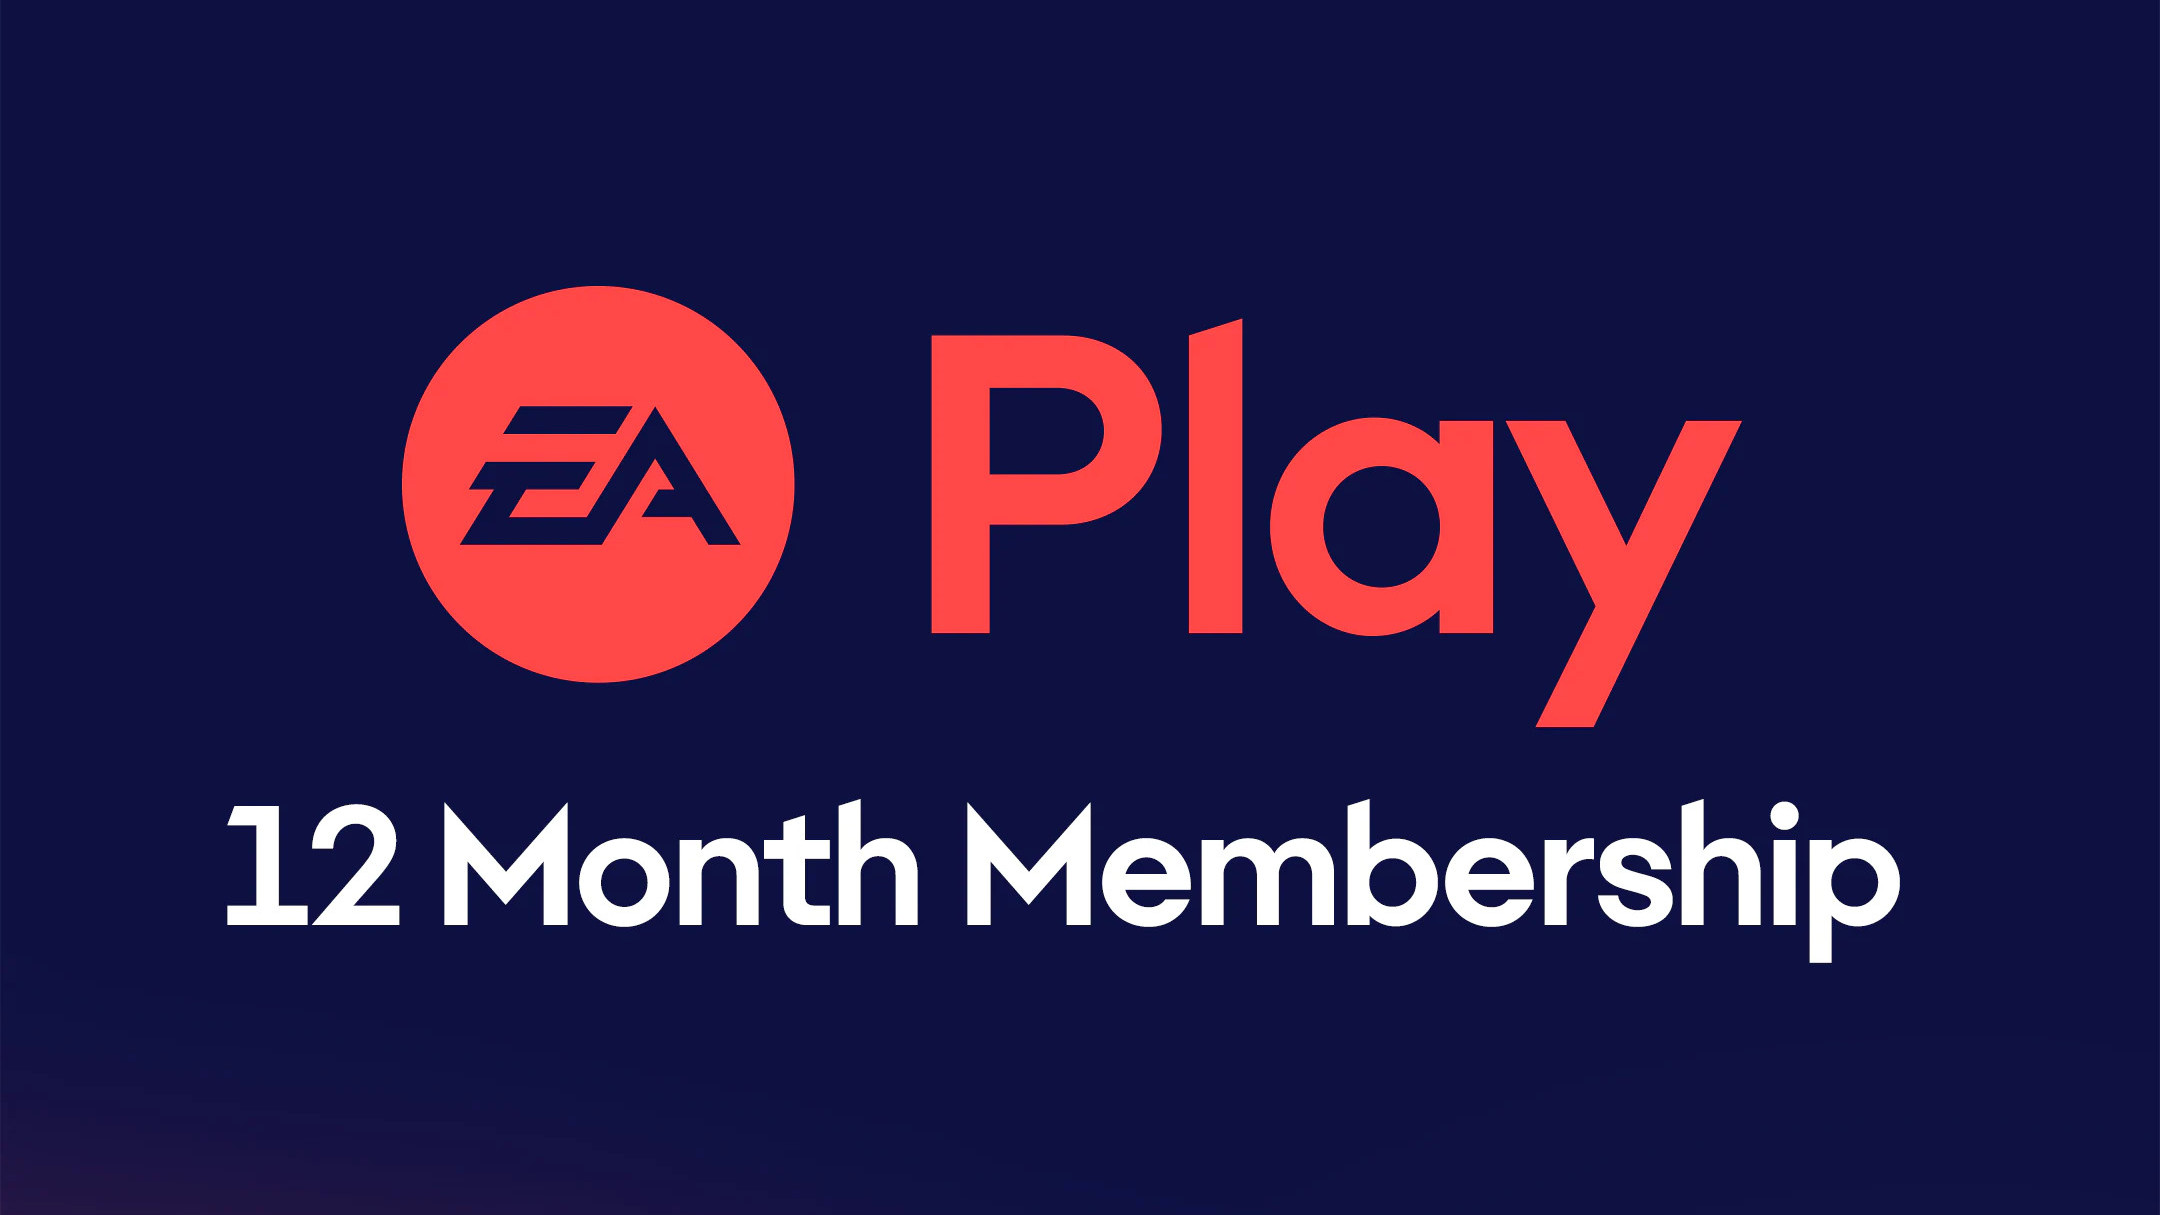 EA Play - 12 Months Subscription PlayStation 4/5 ACCOUNT (22.53$)